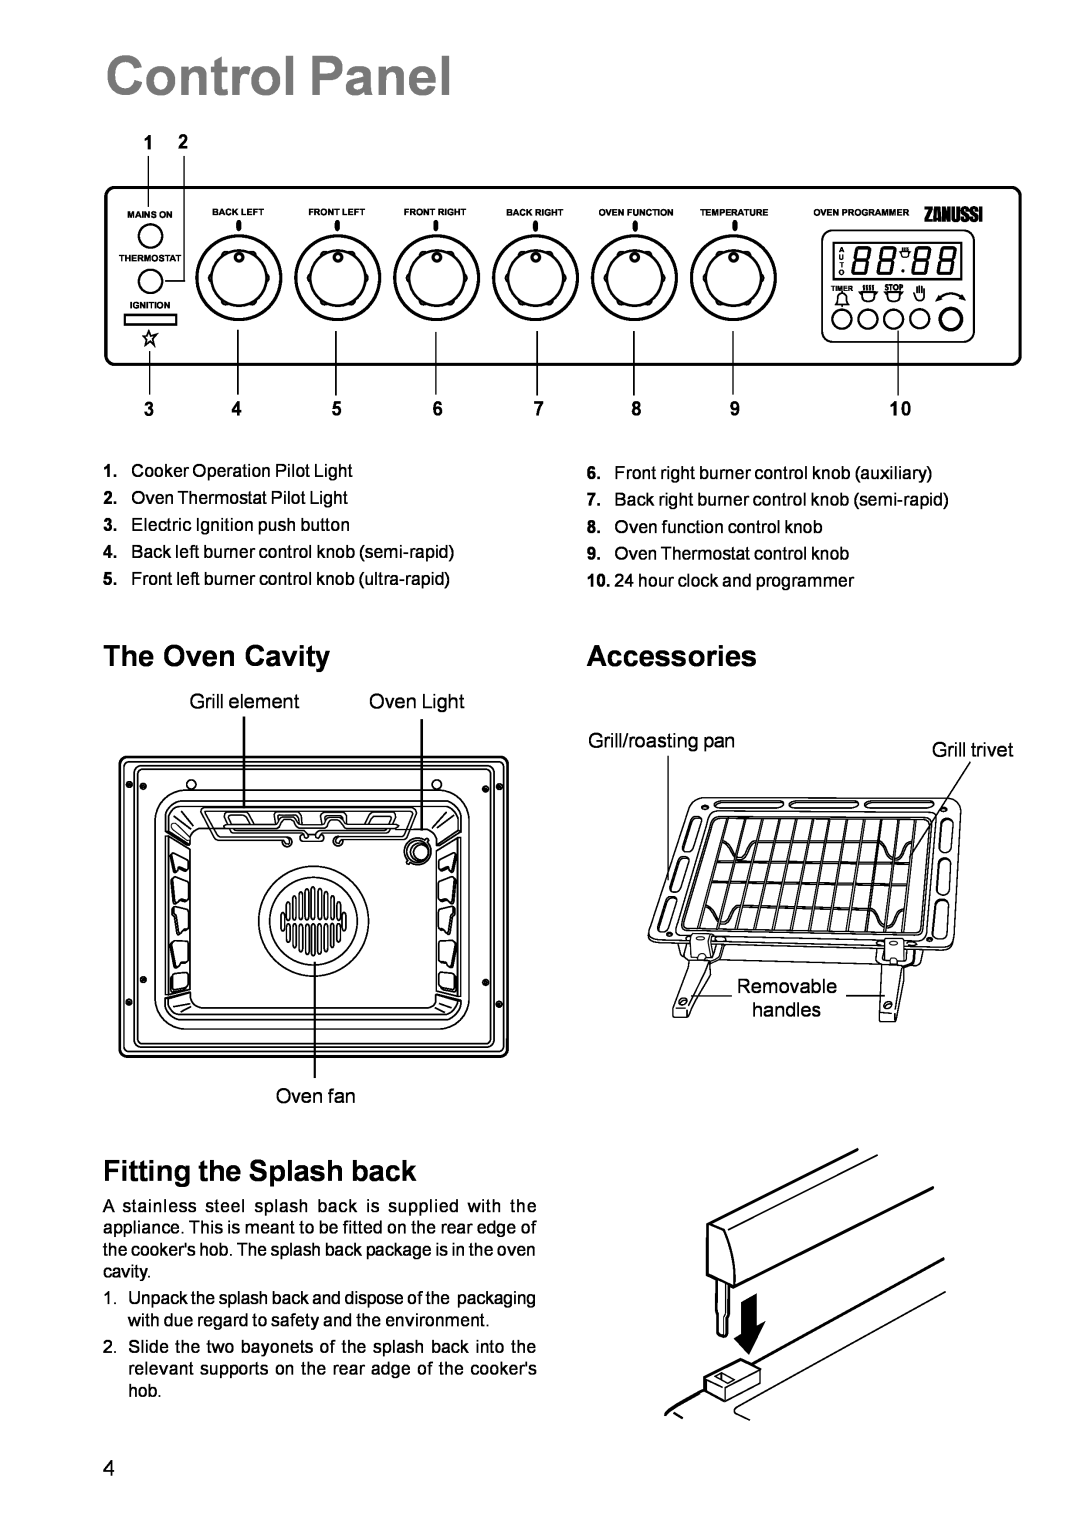 Zanussi ZCM 631 manual Control Panel, The Oven Cavity, Accessories, Fitting the Splash back, Grill element, Oven Light 